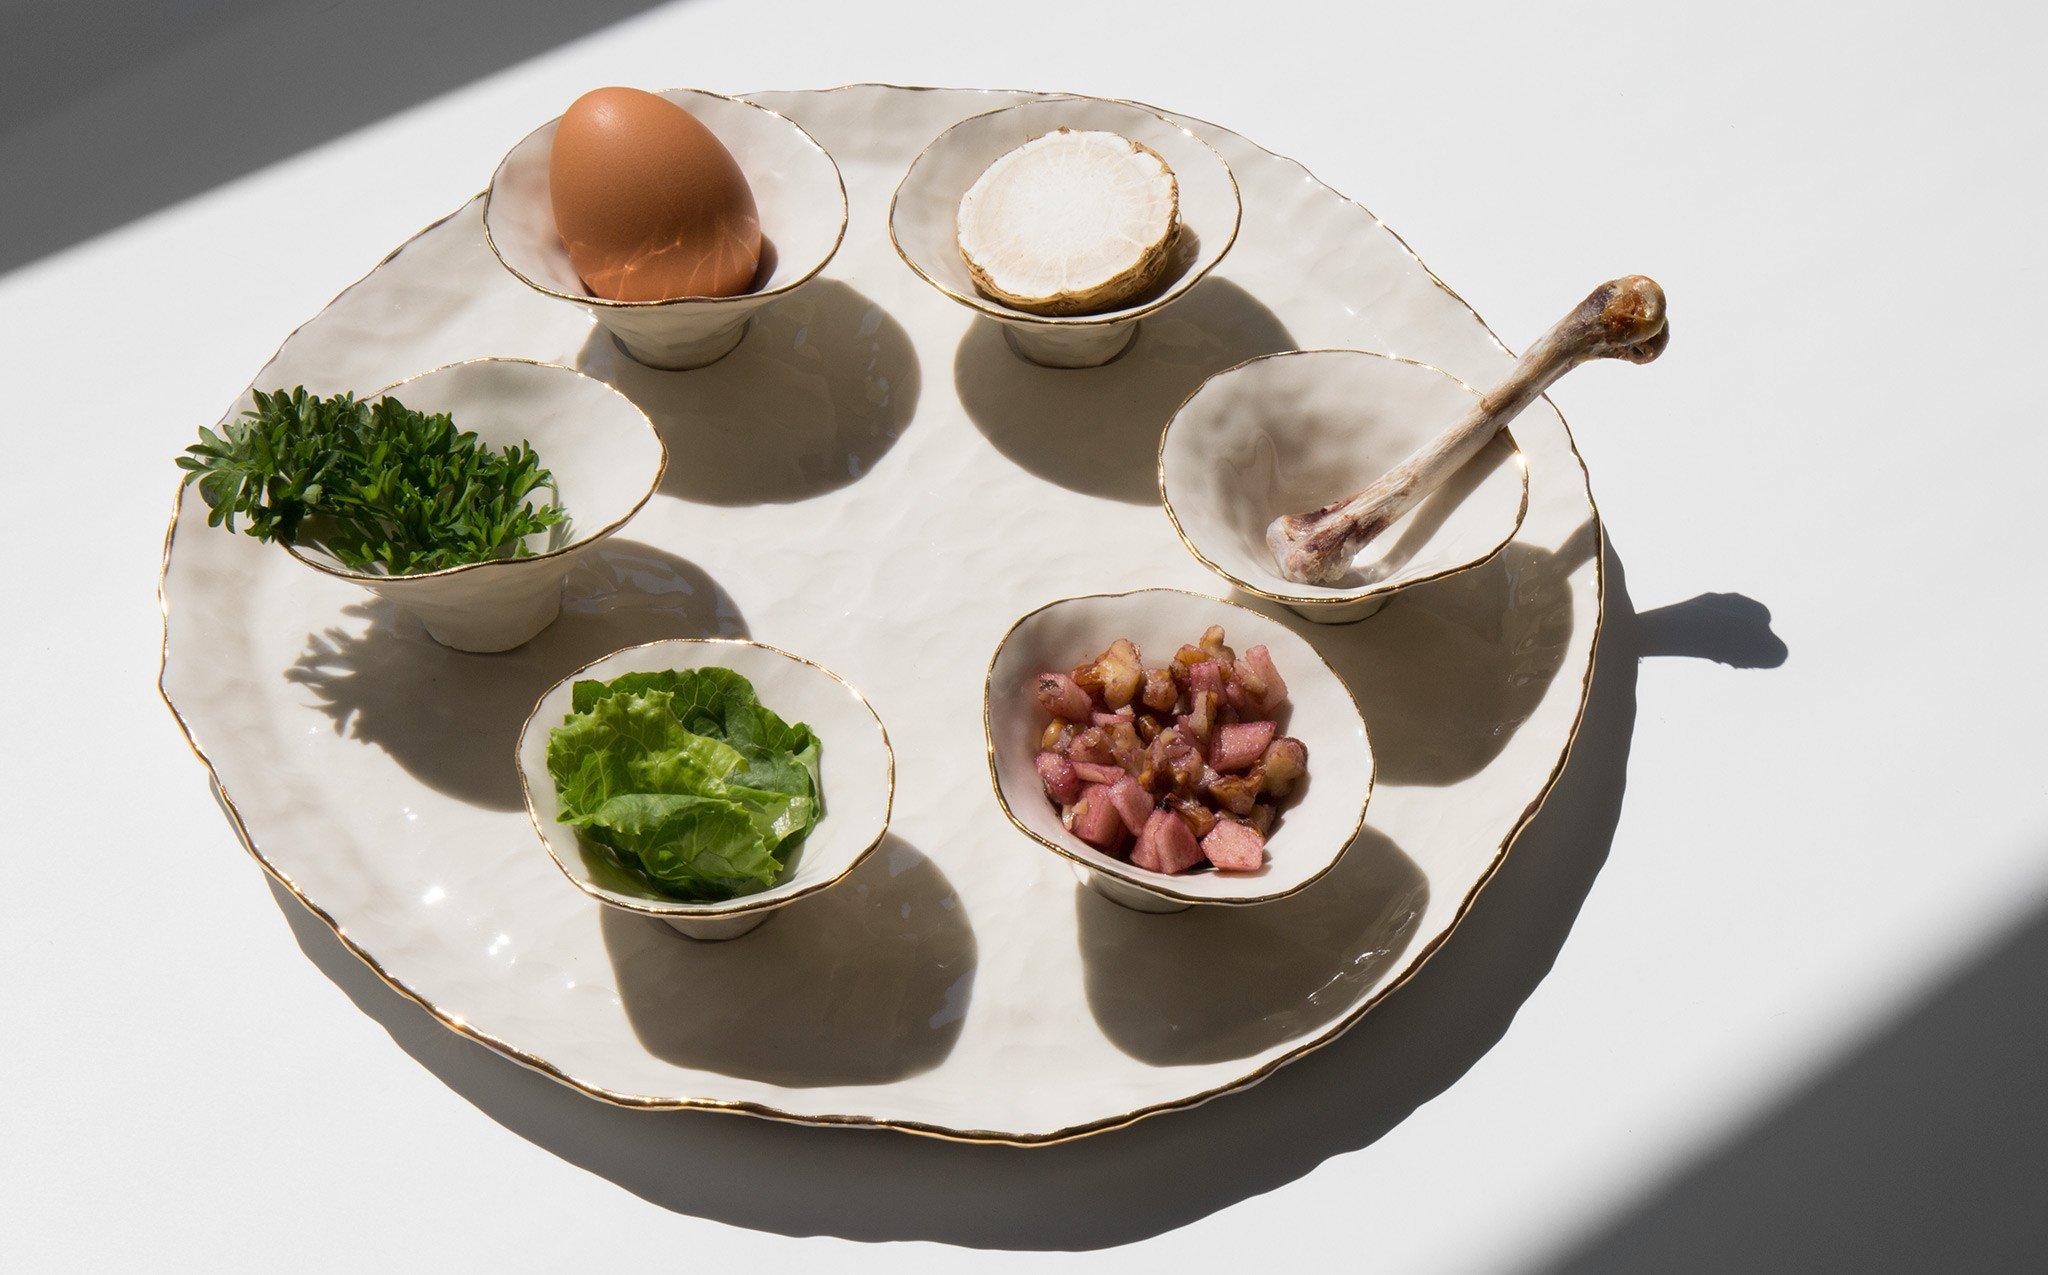 Each Seder plate by Isabel Halley has six pinch pots to hold the six symbolic foods used in the ritual meal. All six pinch pots are clear glazed and lined with a 22-karat gold luster. 

The plate has six indentations for each pot to nestle into.